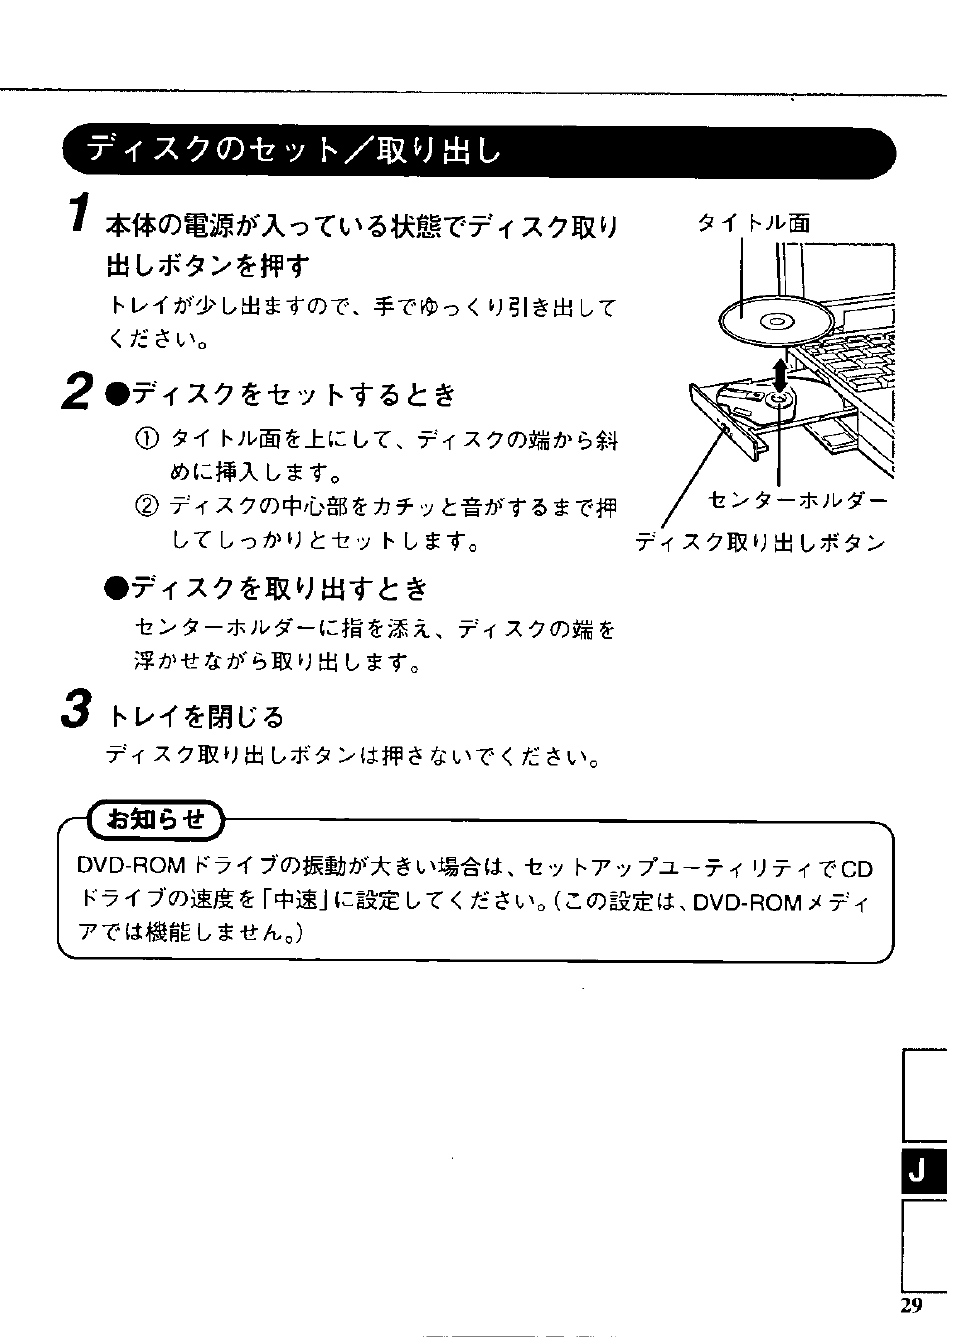 2*^'l'x^&-b y m-5tt | Panasonic DVD-ROM CF-VDD283 Manuel d'utilisation | Page 29 / 36